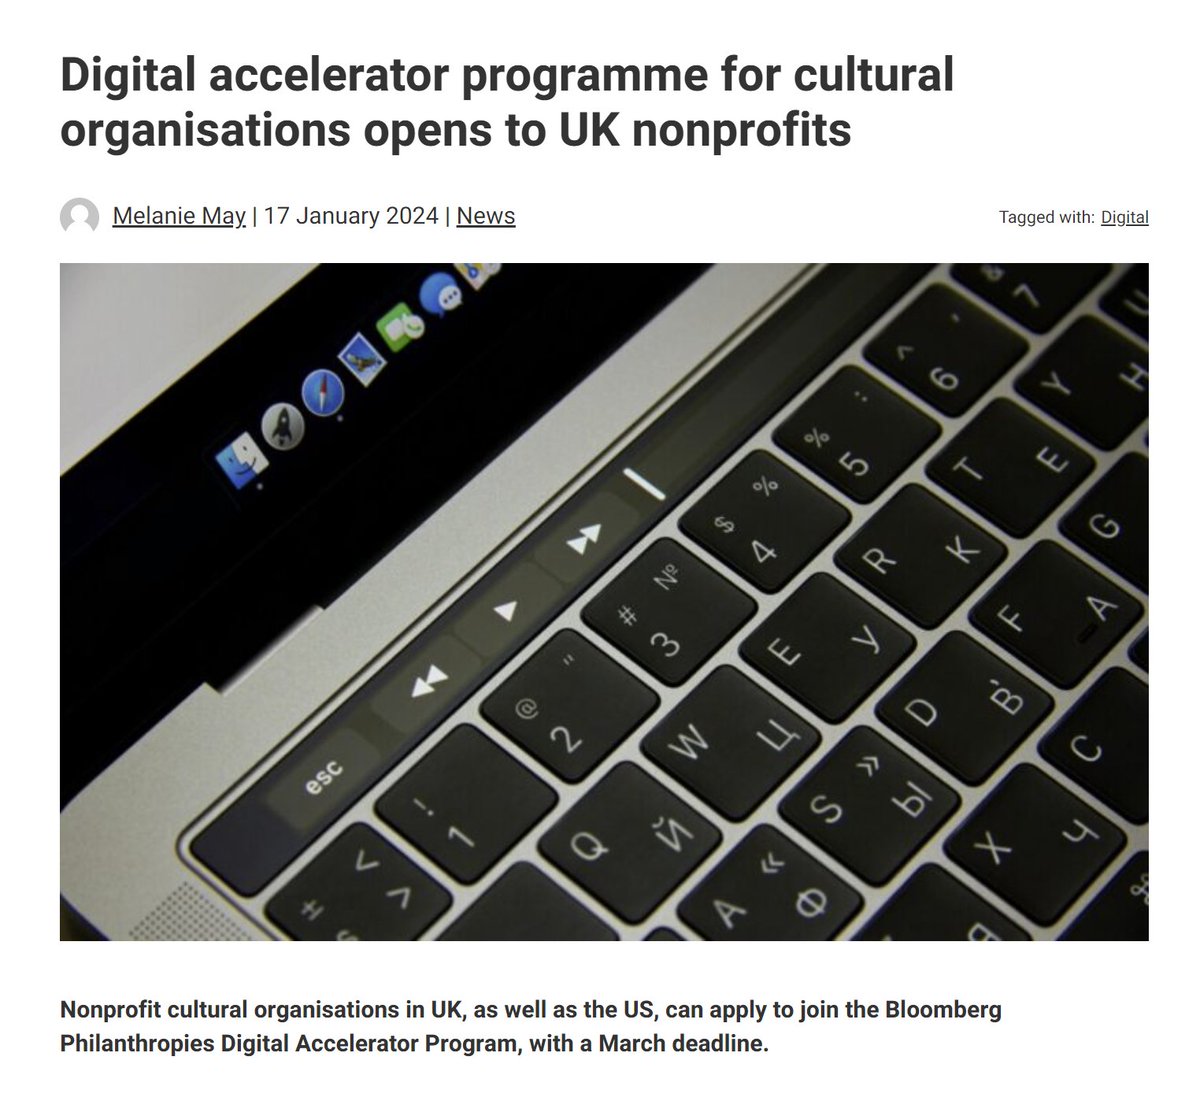 Bloomberg Philanthropies Digital Accelerator Program is now open to nonprofit cultural organisations in the UK and US. If you have an annual budget of £500,000 plus and have been in operation for at least three years, you can apply until 13 March. More info @ukfundraising